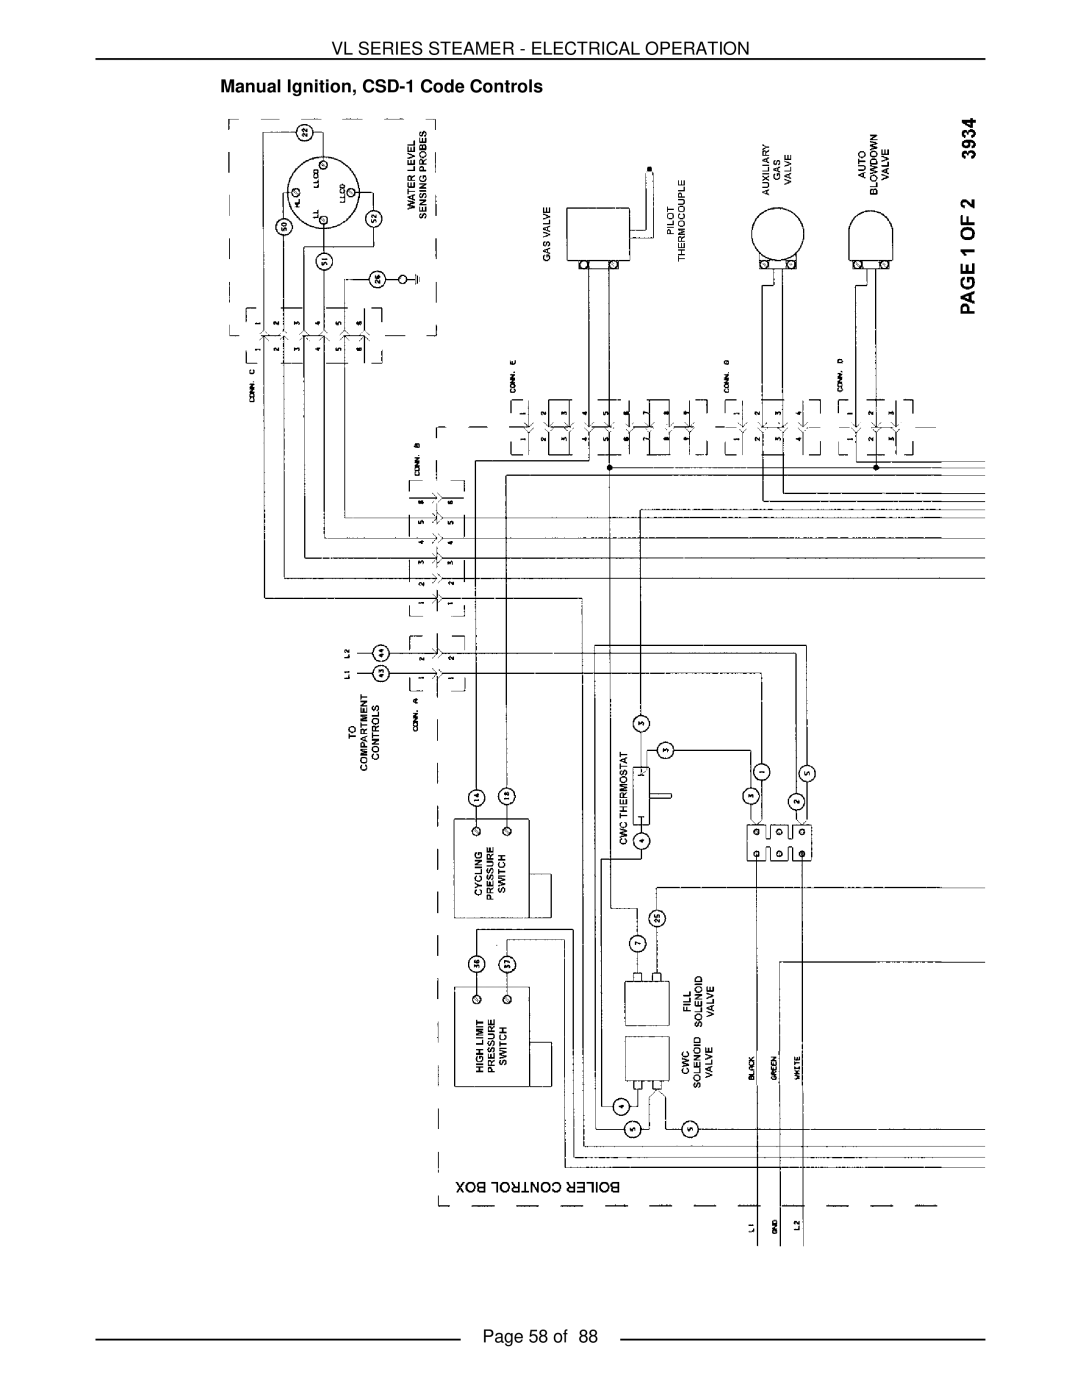 Vulcan-Hart VL3GAS, VL3GMS Vl Series Steamer - Electrical Operation, Manual Ignition, CSD-1Code Controls, Page 58 of 